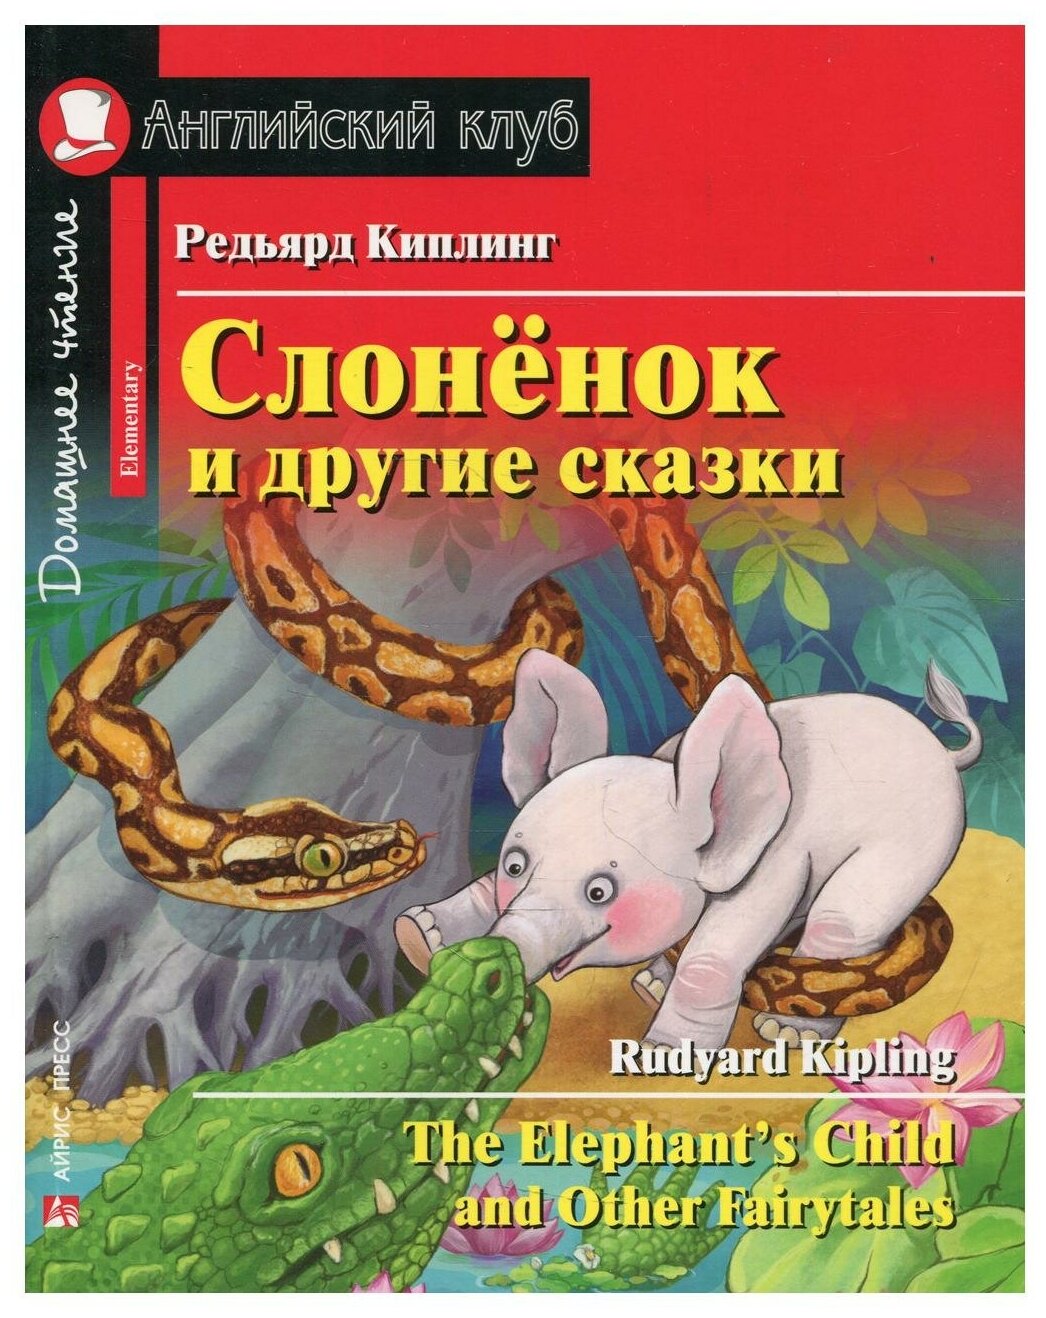 Слоненок и другие сказки / The Elephant's Child and Other Fairytales